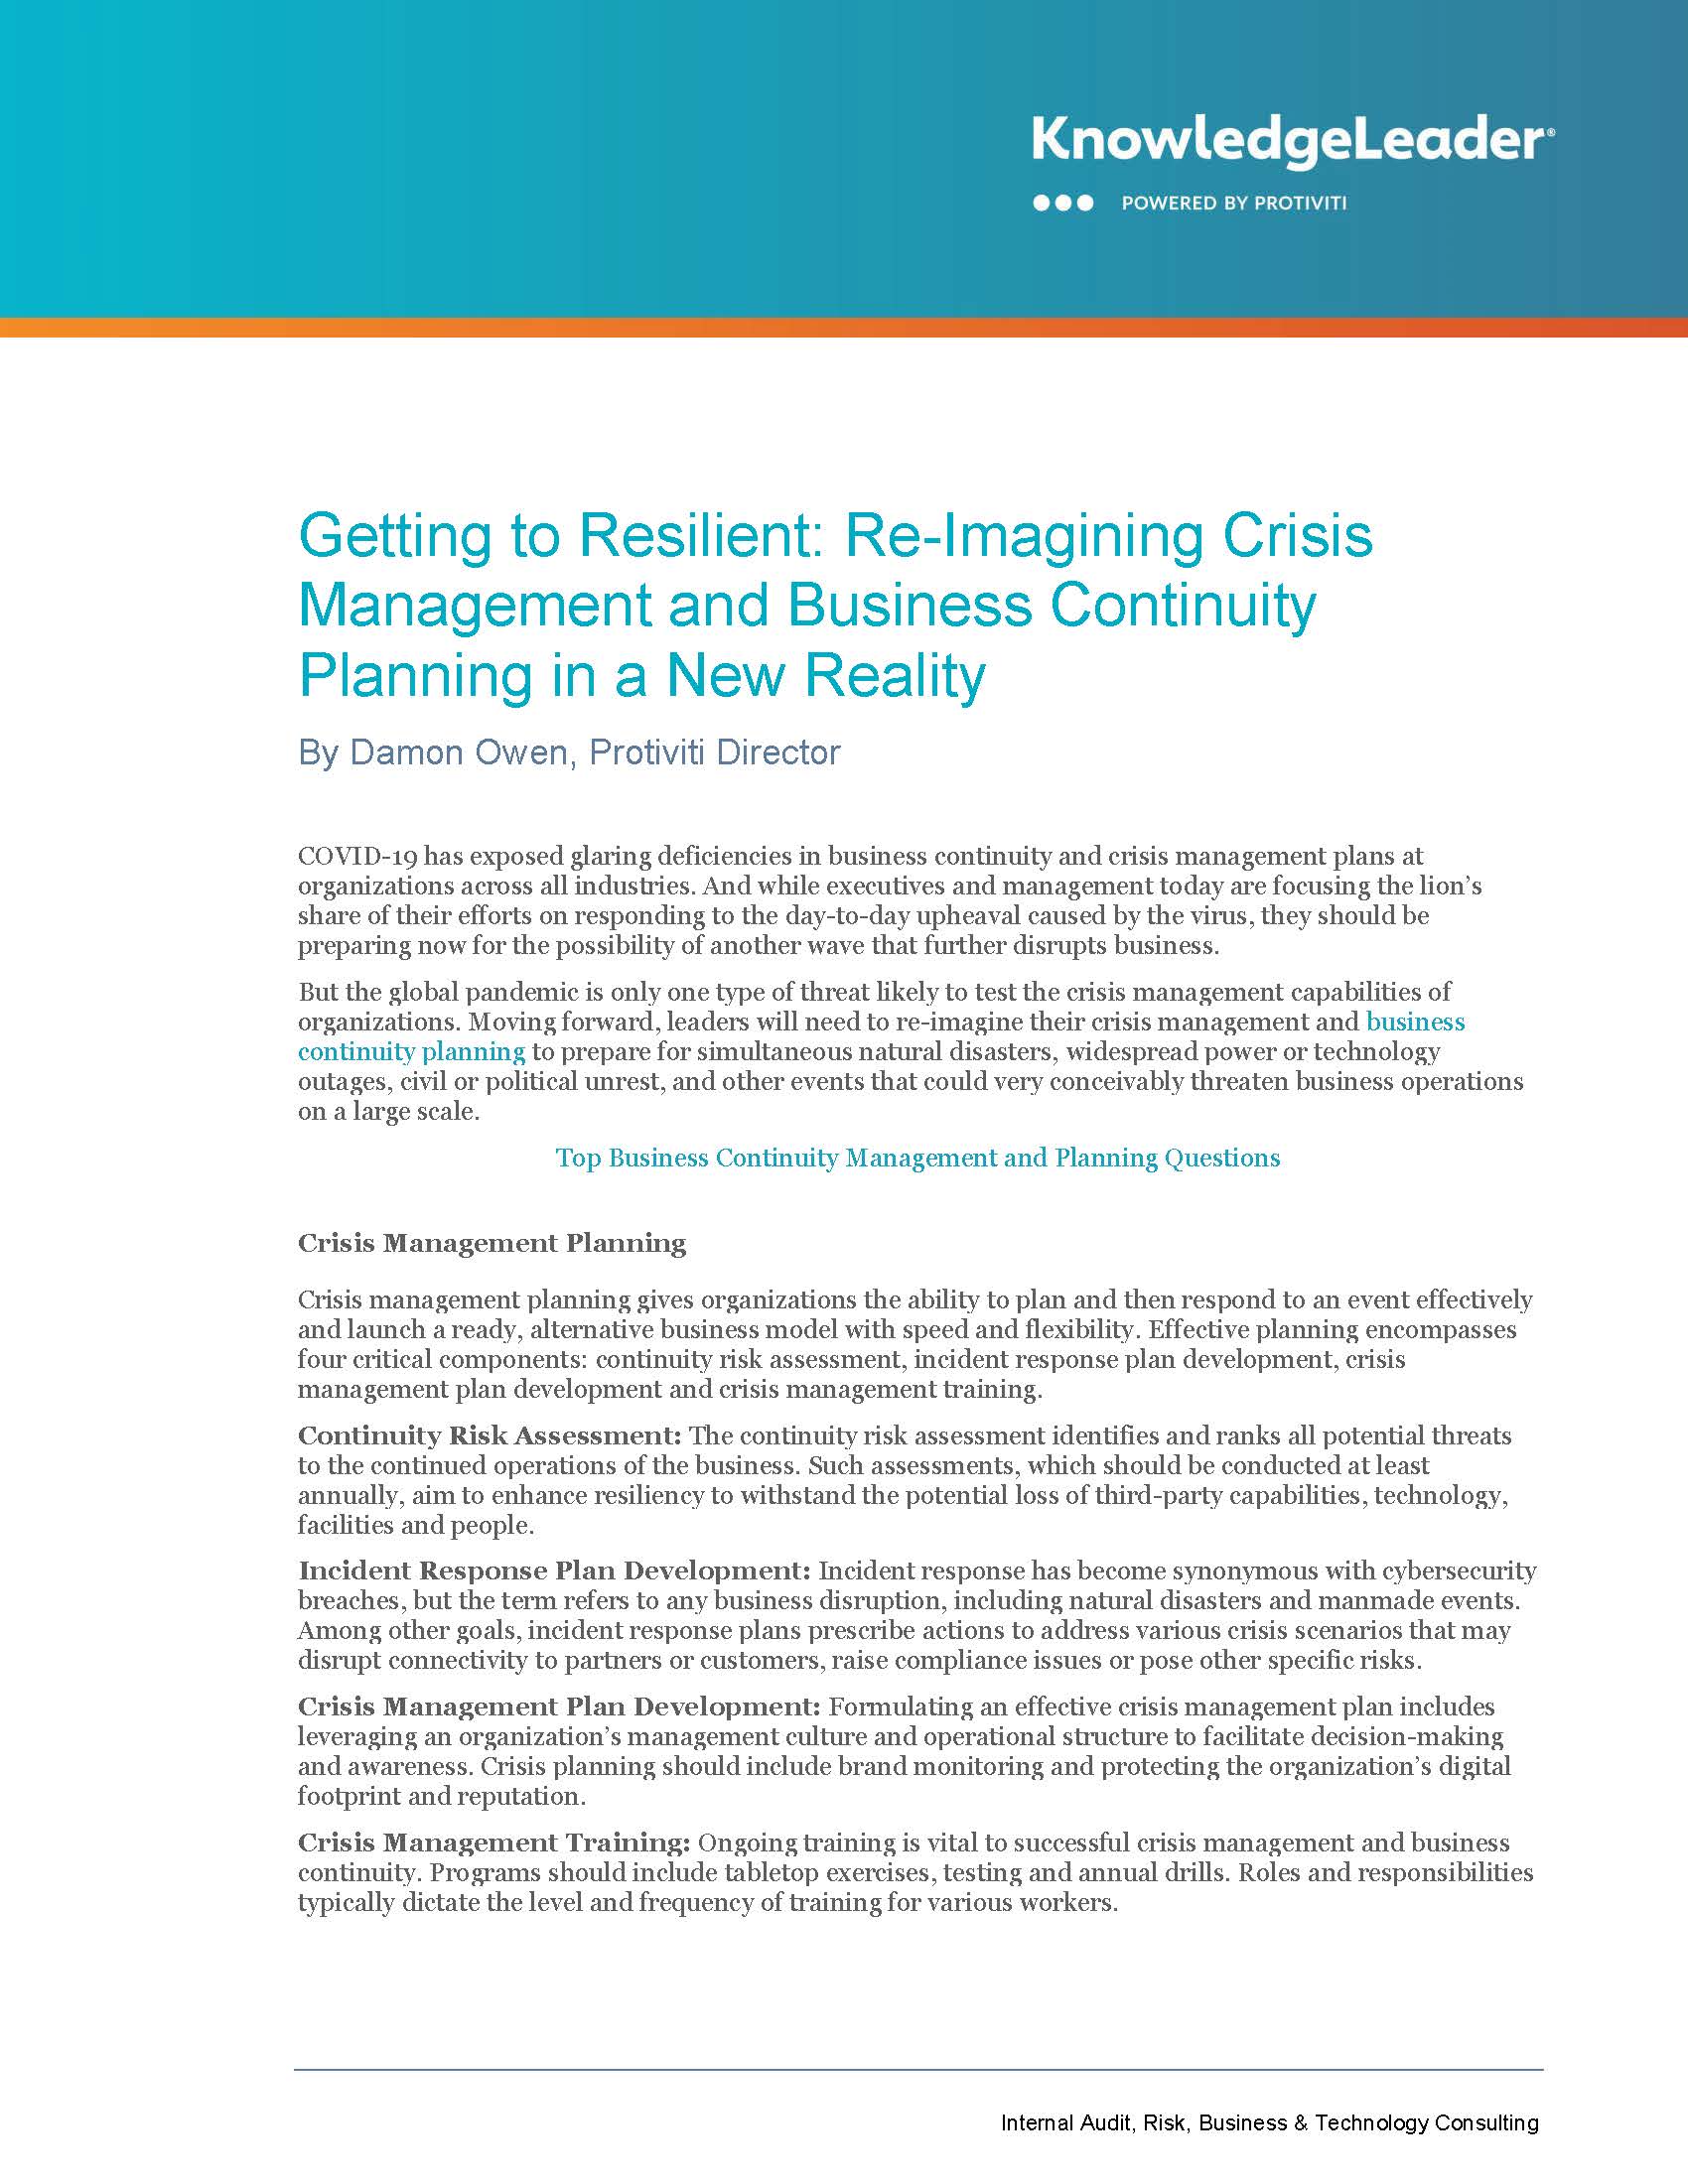 Screenshot of the first page of Getting to Resilient Re-Imagining Crisis Management and Business Continuity Planning in a New Reality.